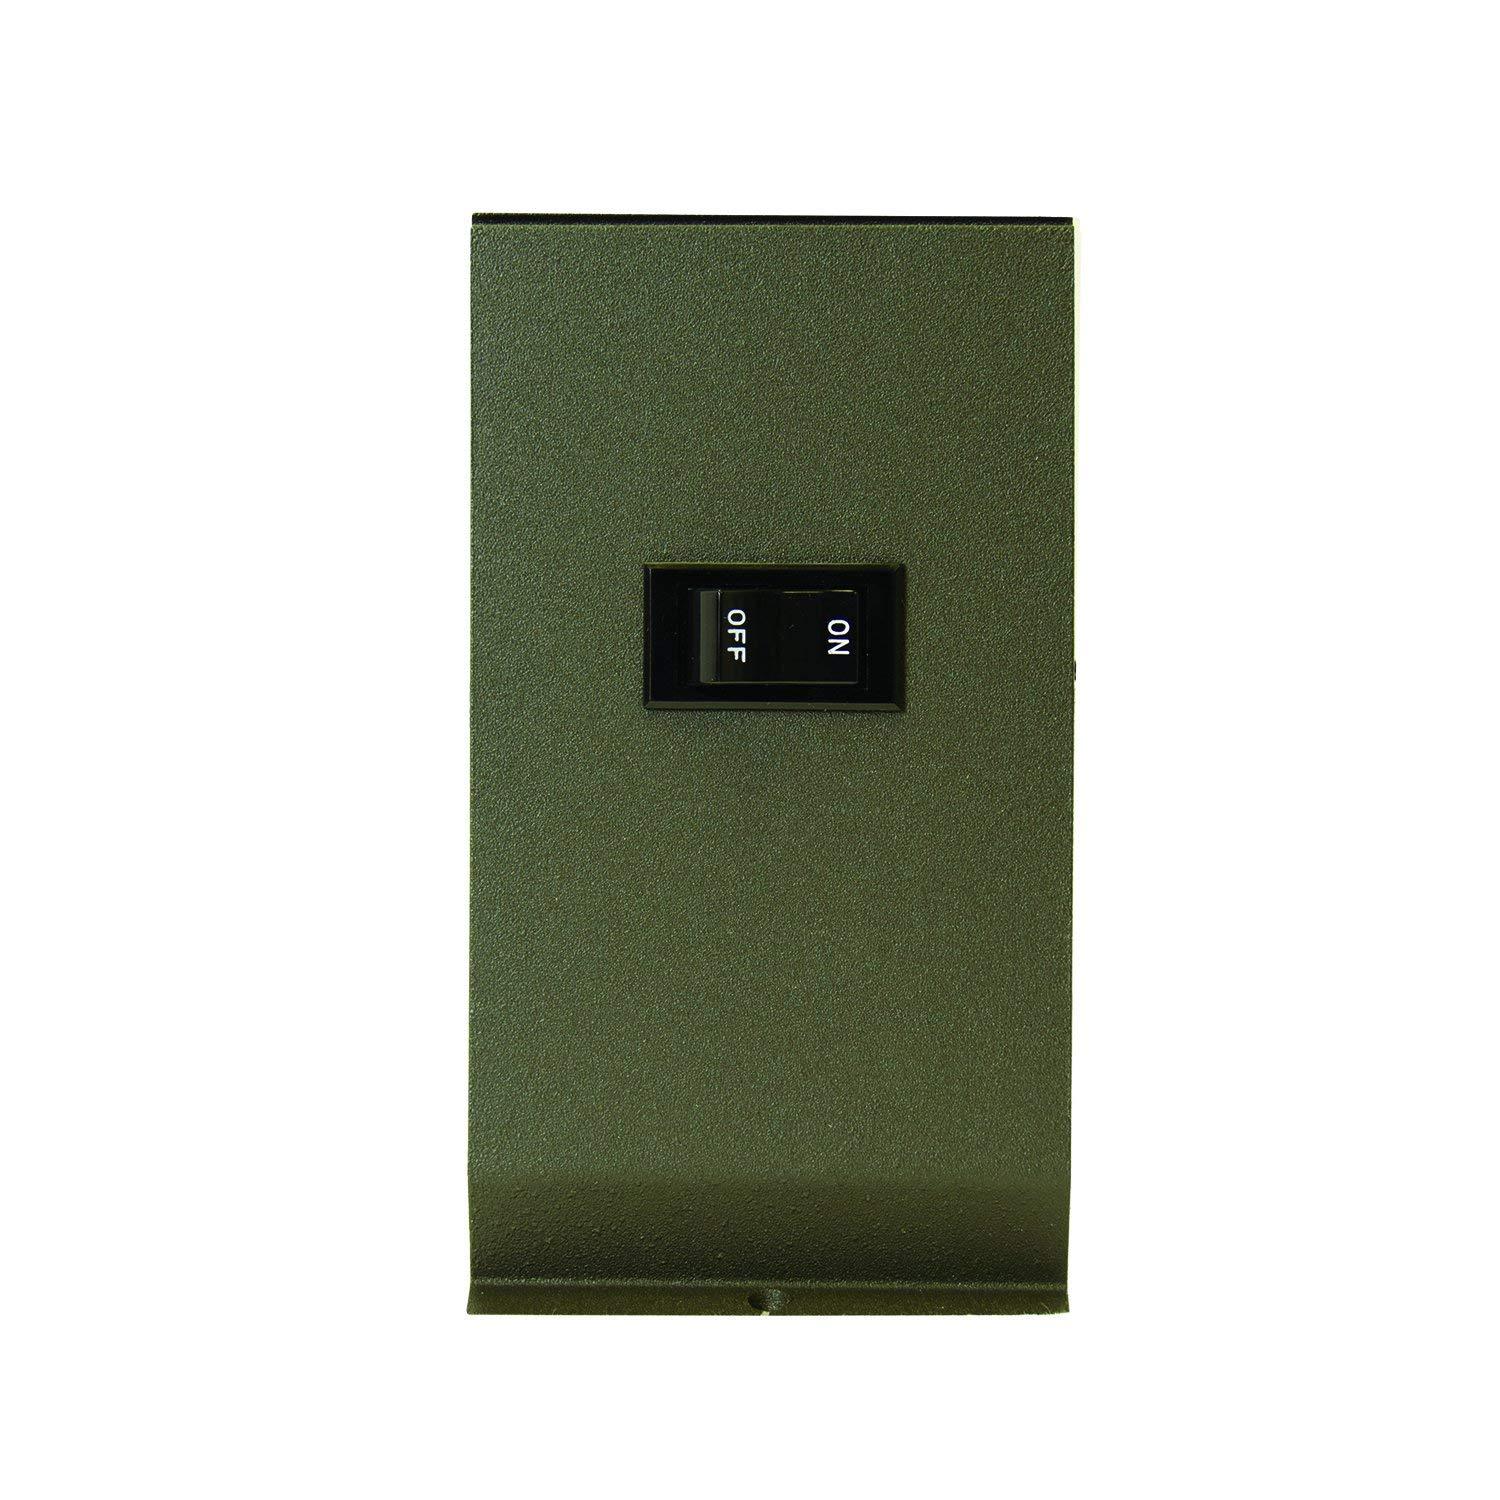 TPI 20A/125-277VAC DPST Disconnect Switch for 3900 Series (Brown) - 3900DSC